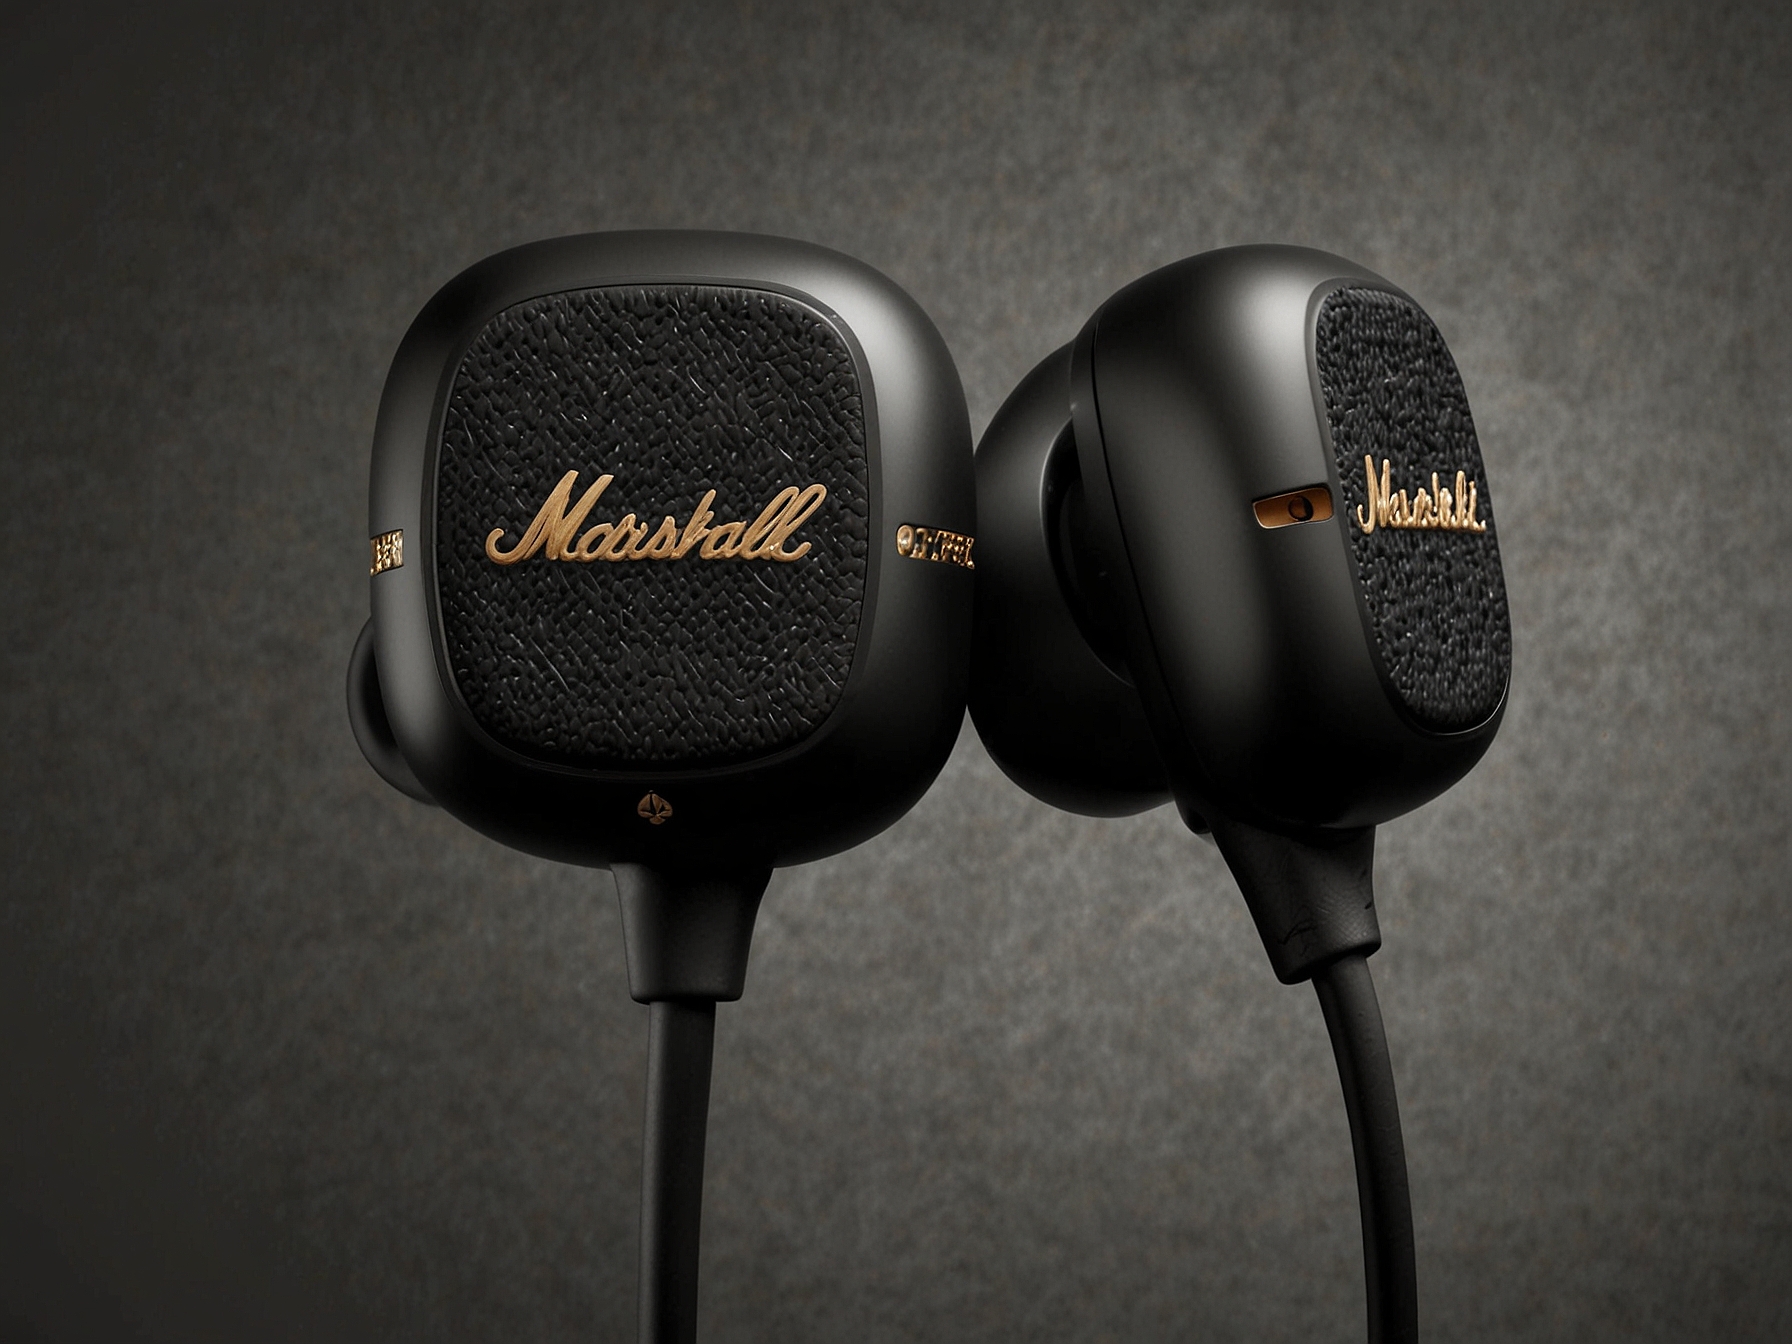 The new Marshall Minor IV TWS earbuds feature a compact design with a textured vinyl finish and signature script logo, reflecting the iconic amplifier design and offering a sense of nostalgia and sophistication.